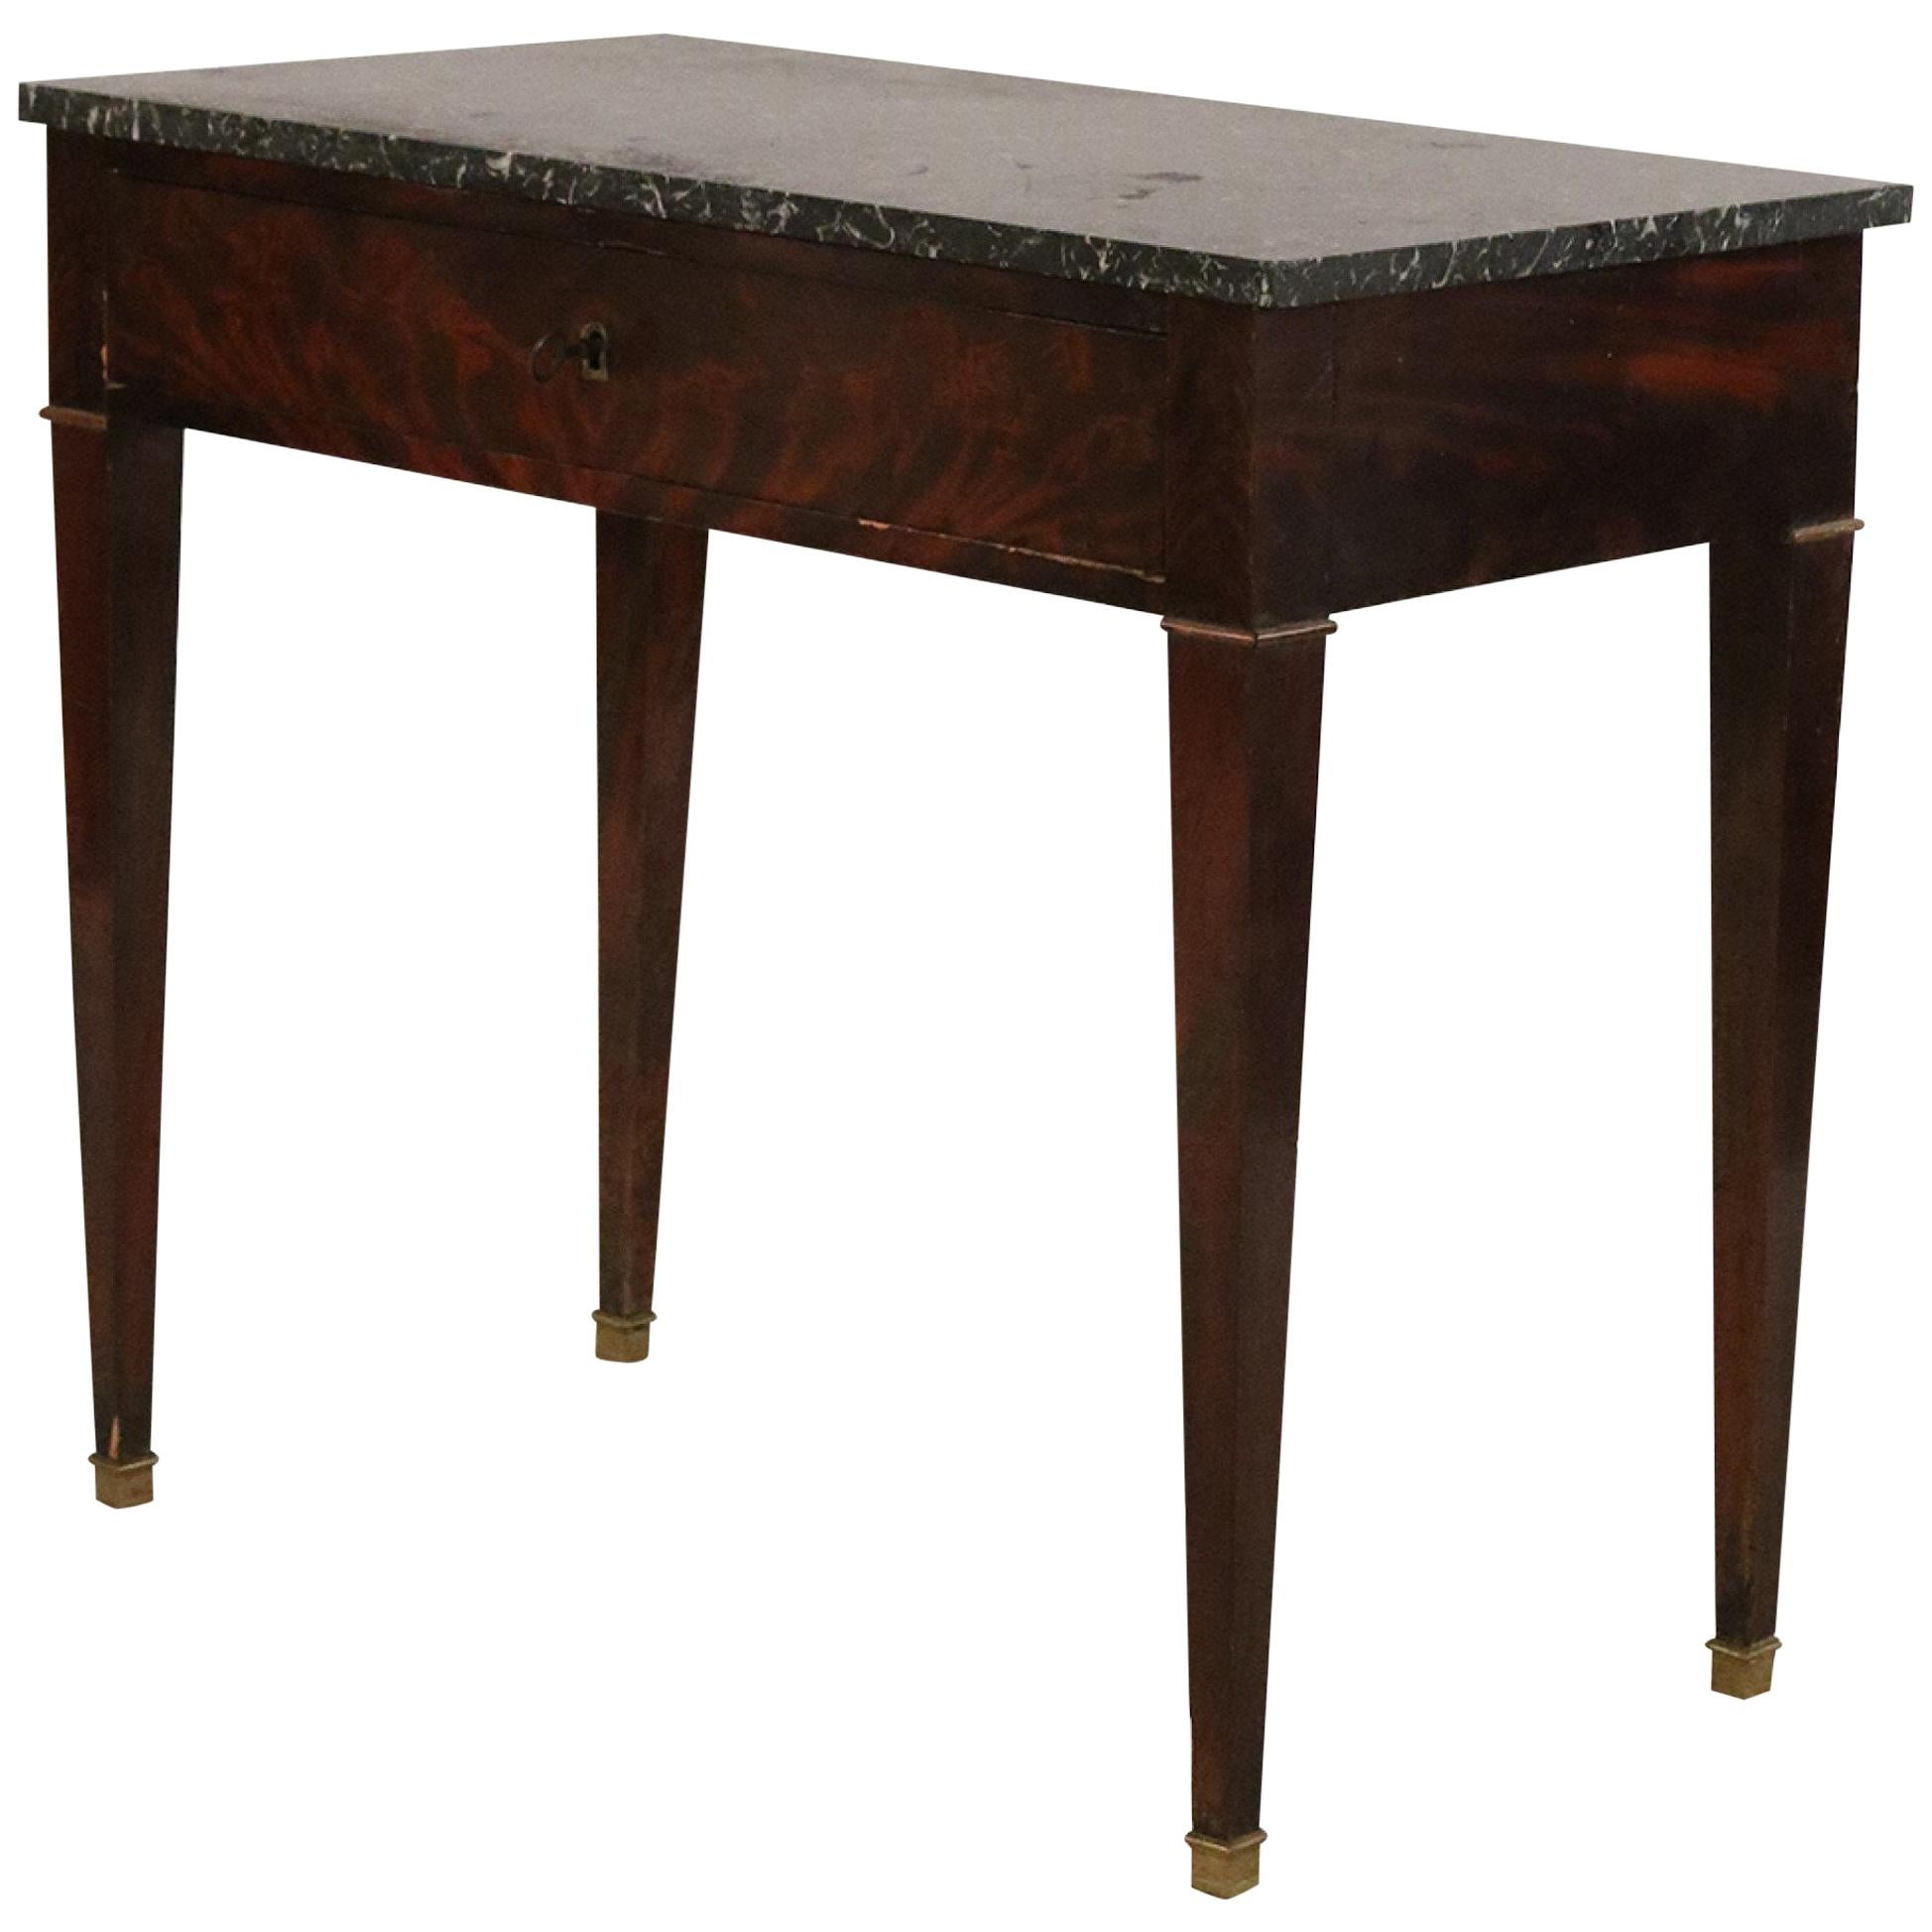 English Georgian Style Mahogany and Black Marble Console Table